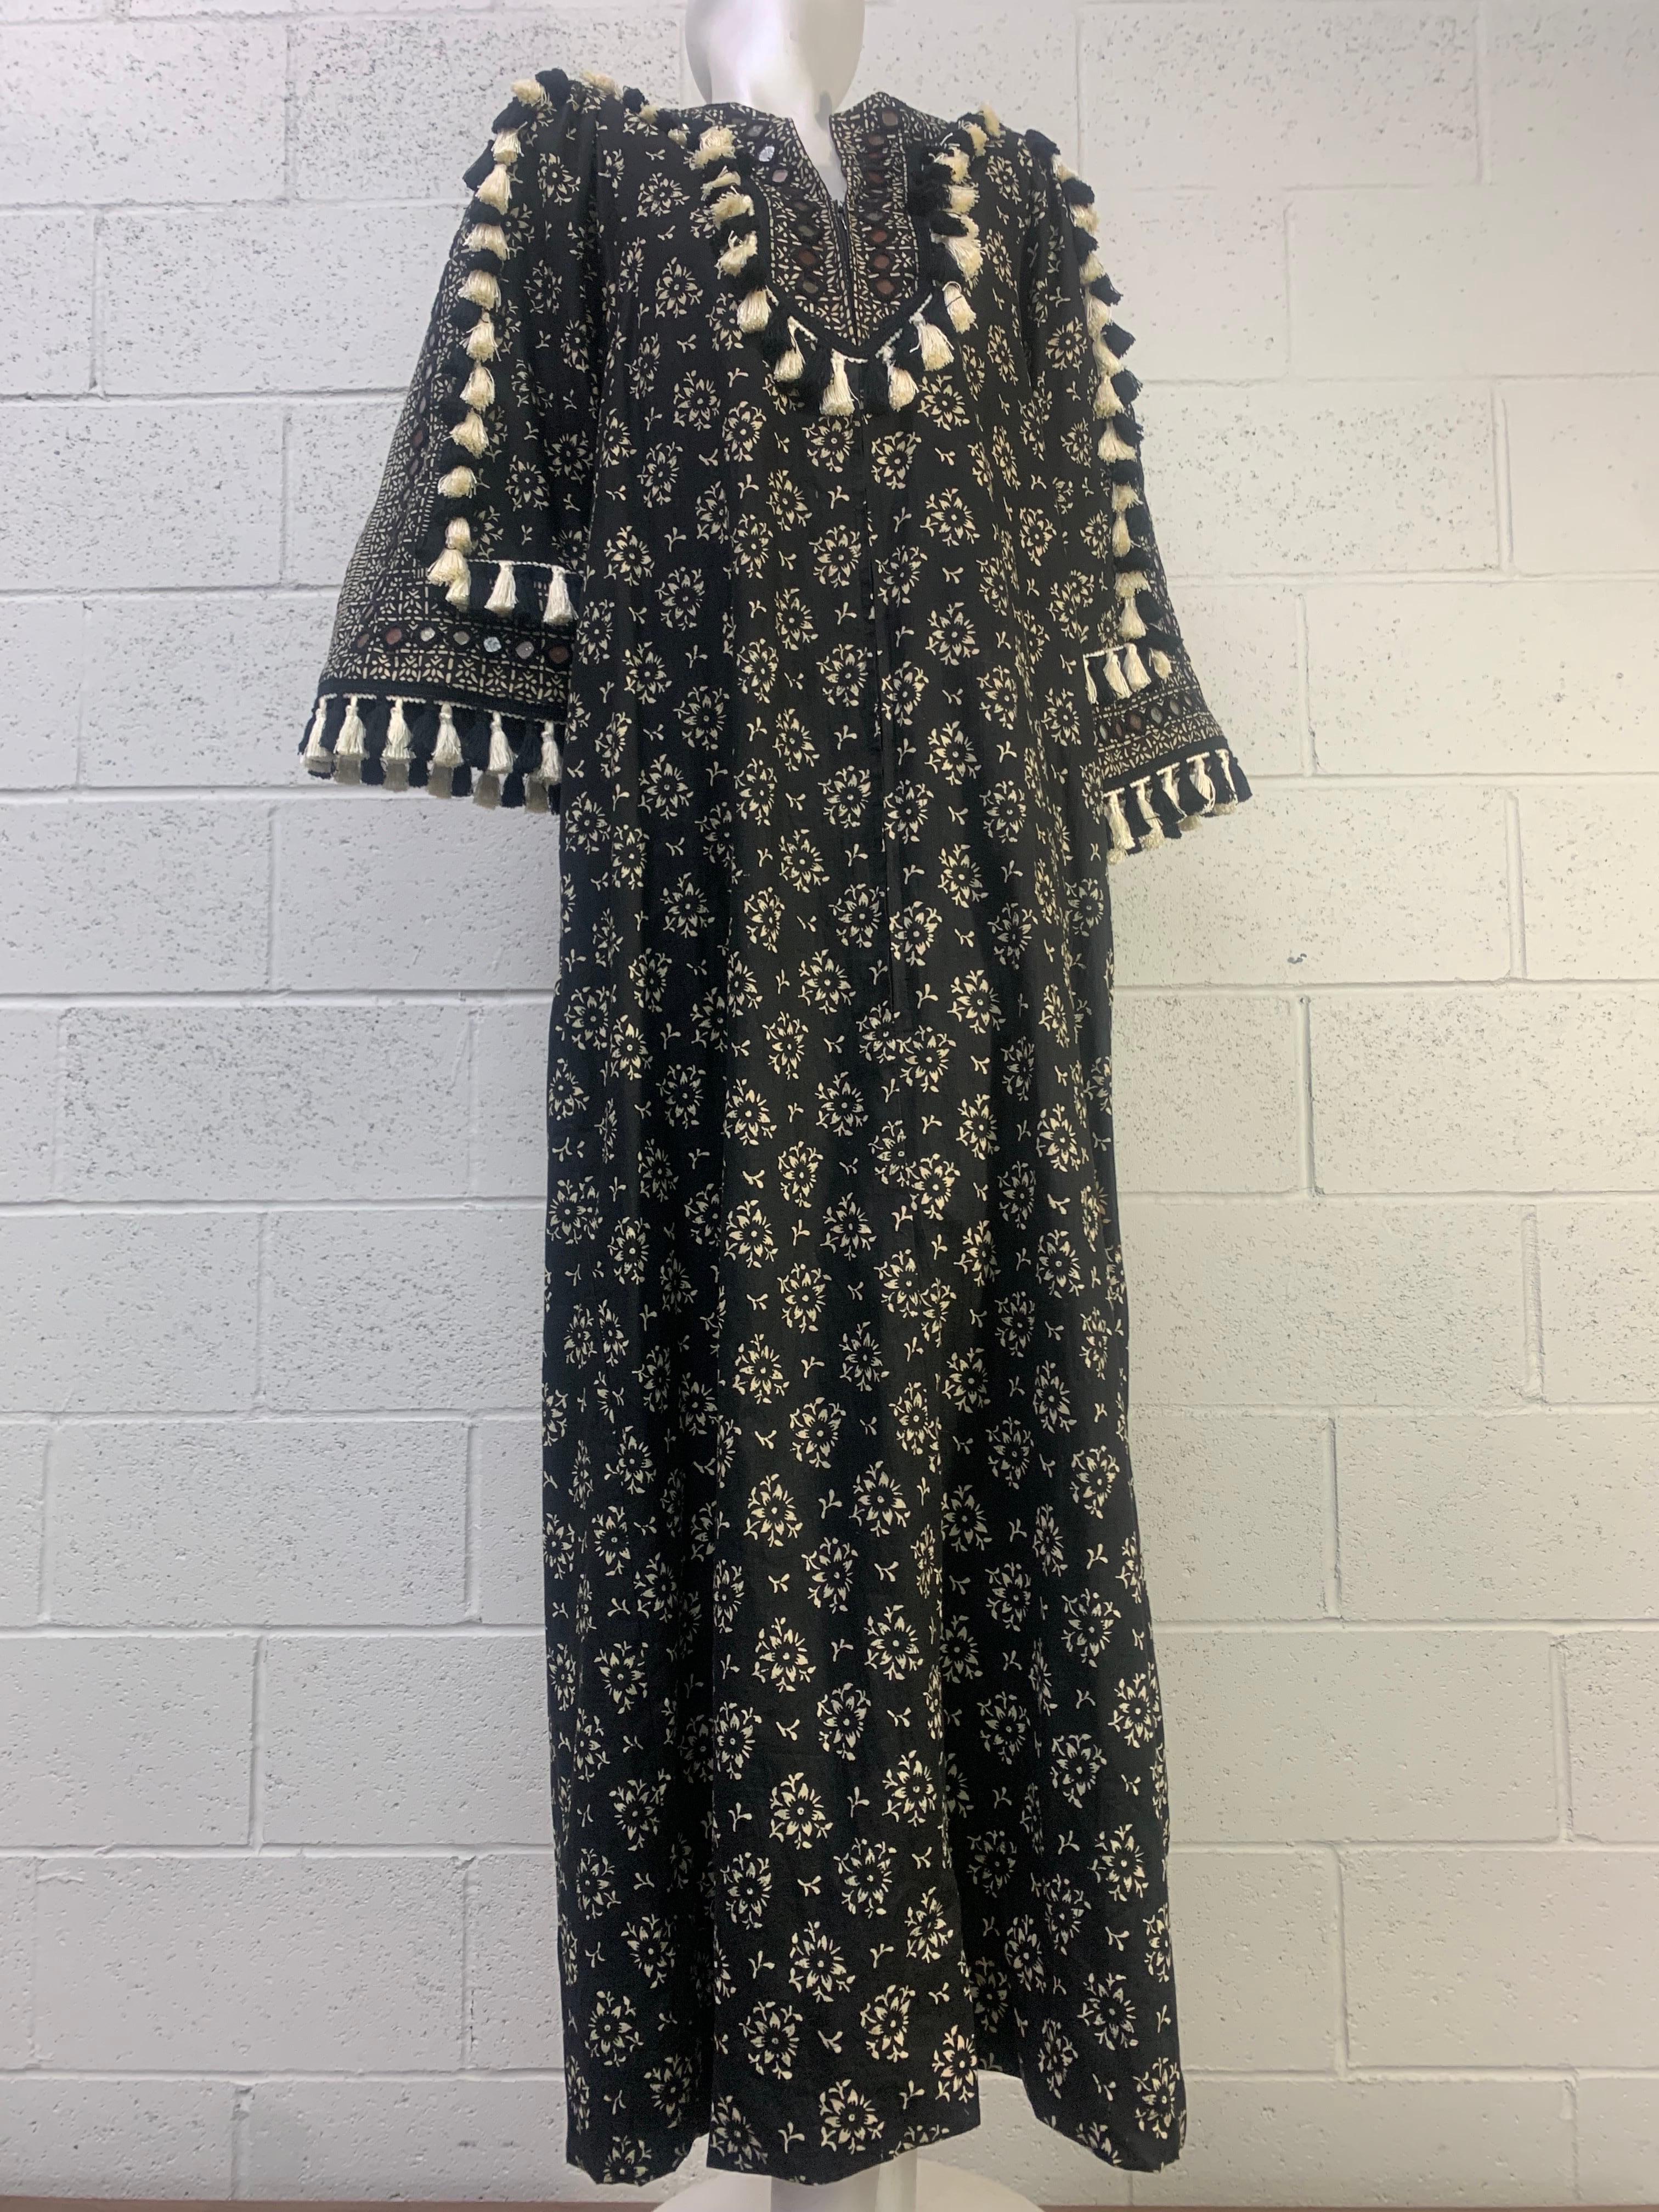 Torso Creations Embellished Ramona Rull B/W Block Print Hostess Gown w Tassels: Complimentary block-printed patterns in black and white make this visually exciting gown sing! Bib front is embellished with mirrors, as are the sleeves. Tassel trim